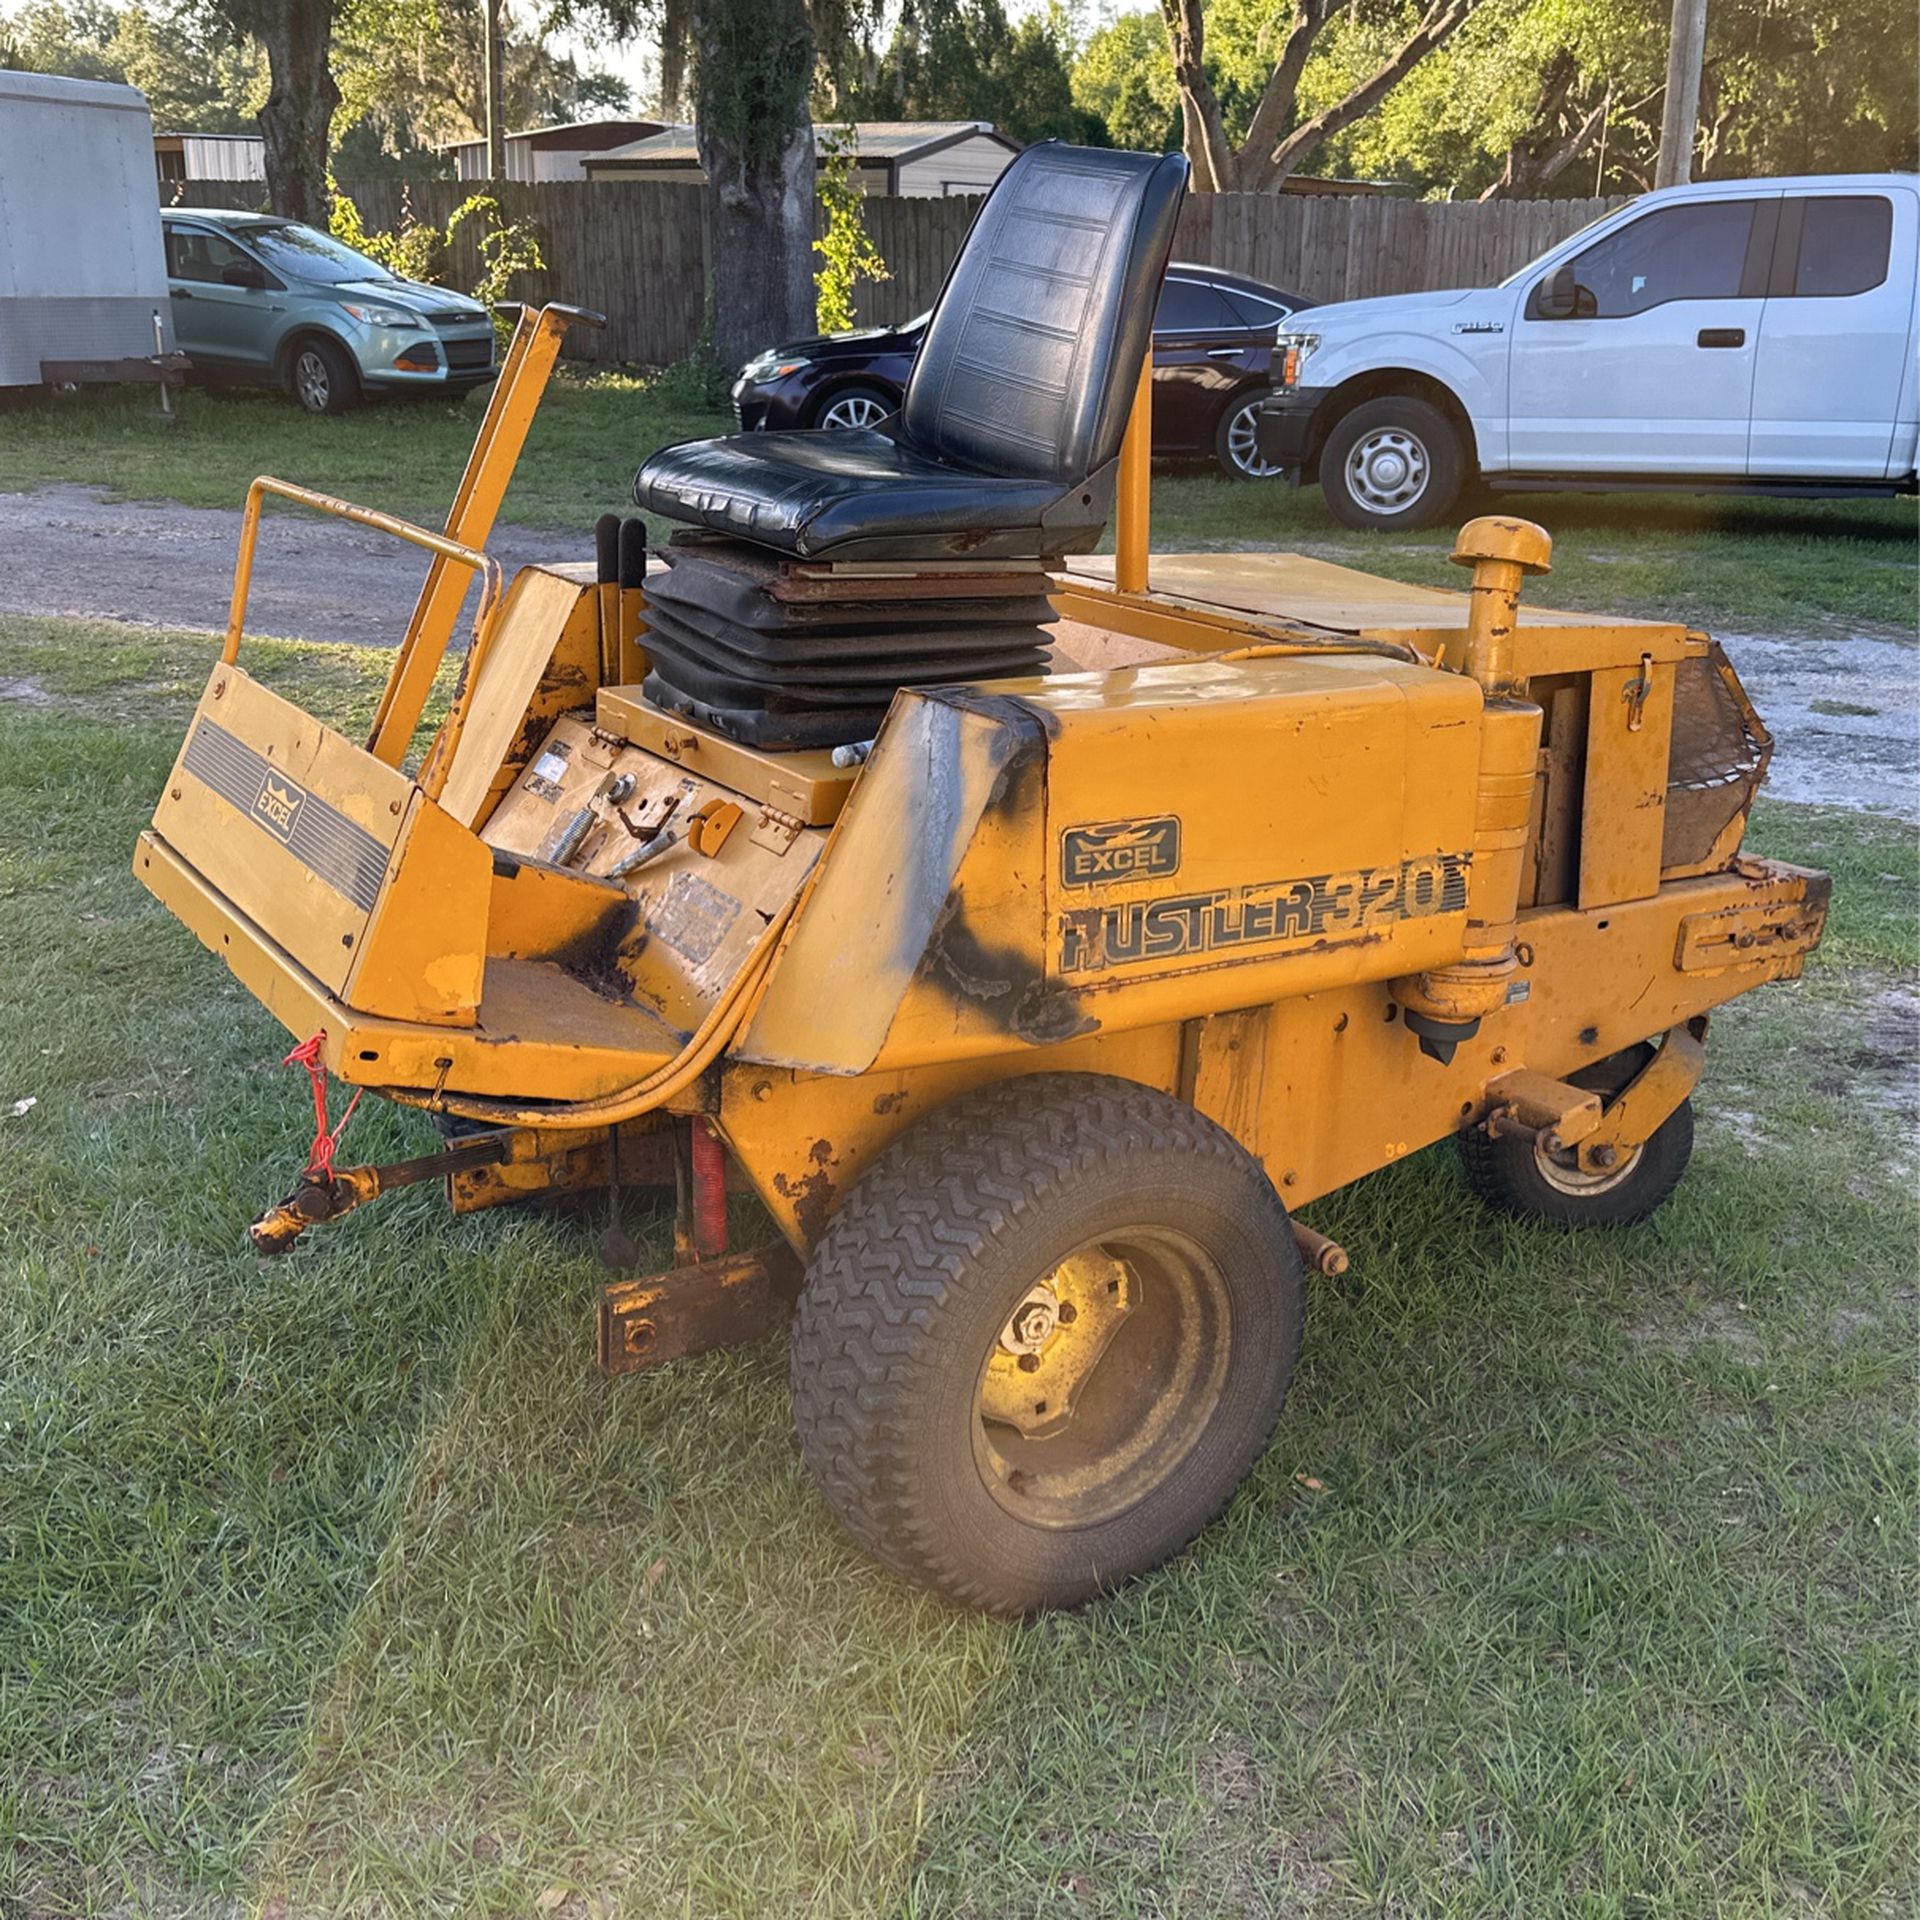 Excel Hustler 320  Mower  With Diesel Engine  Runs and drives Comes (Parts only more deck See Pics)